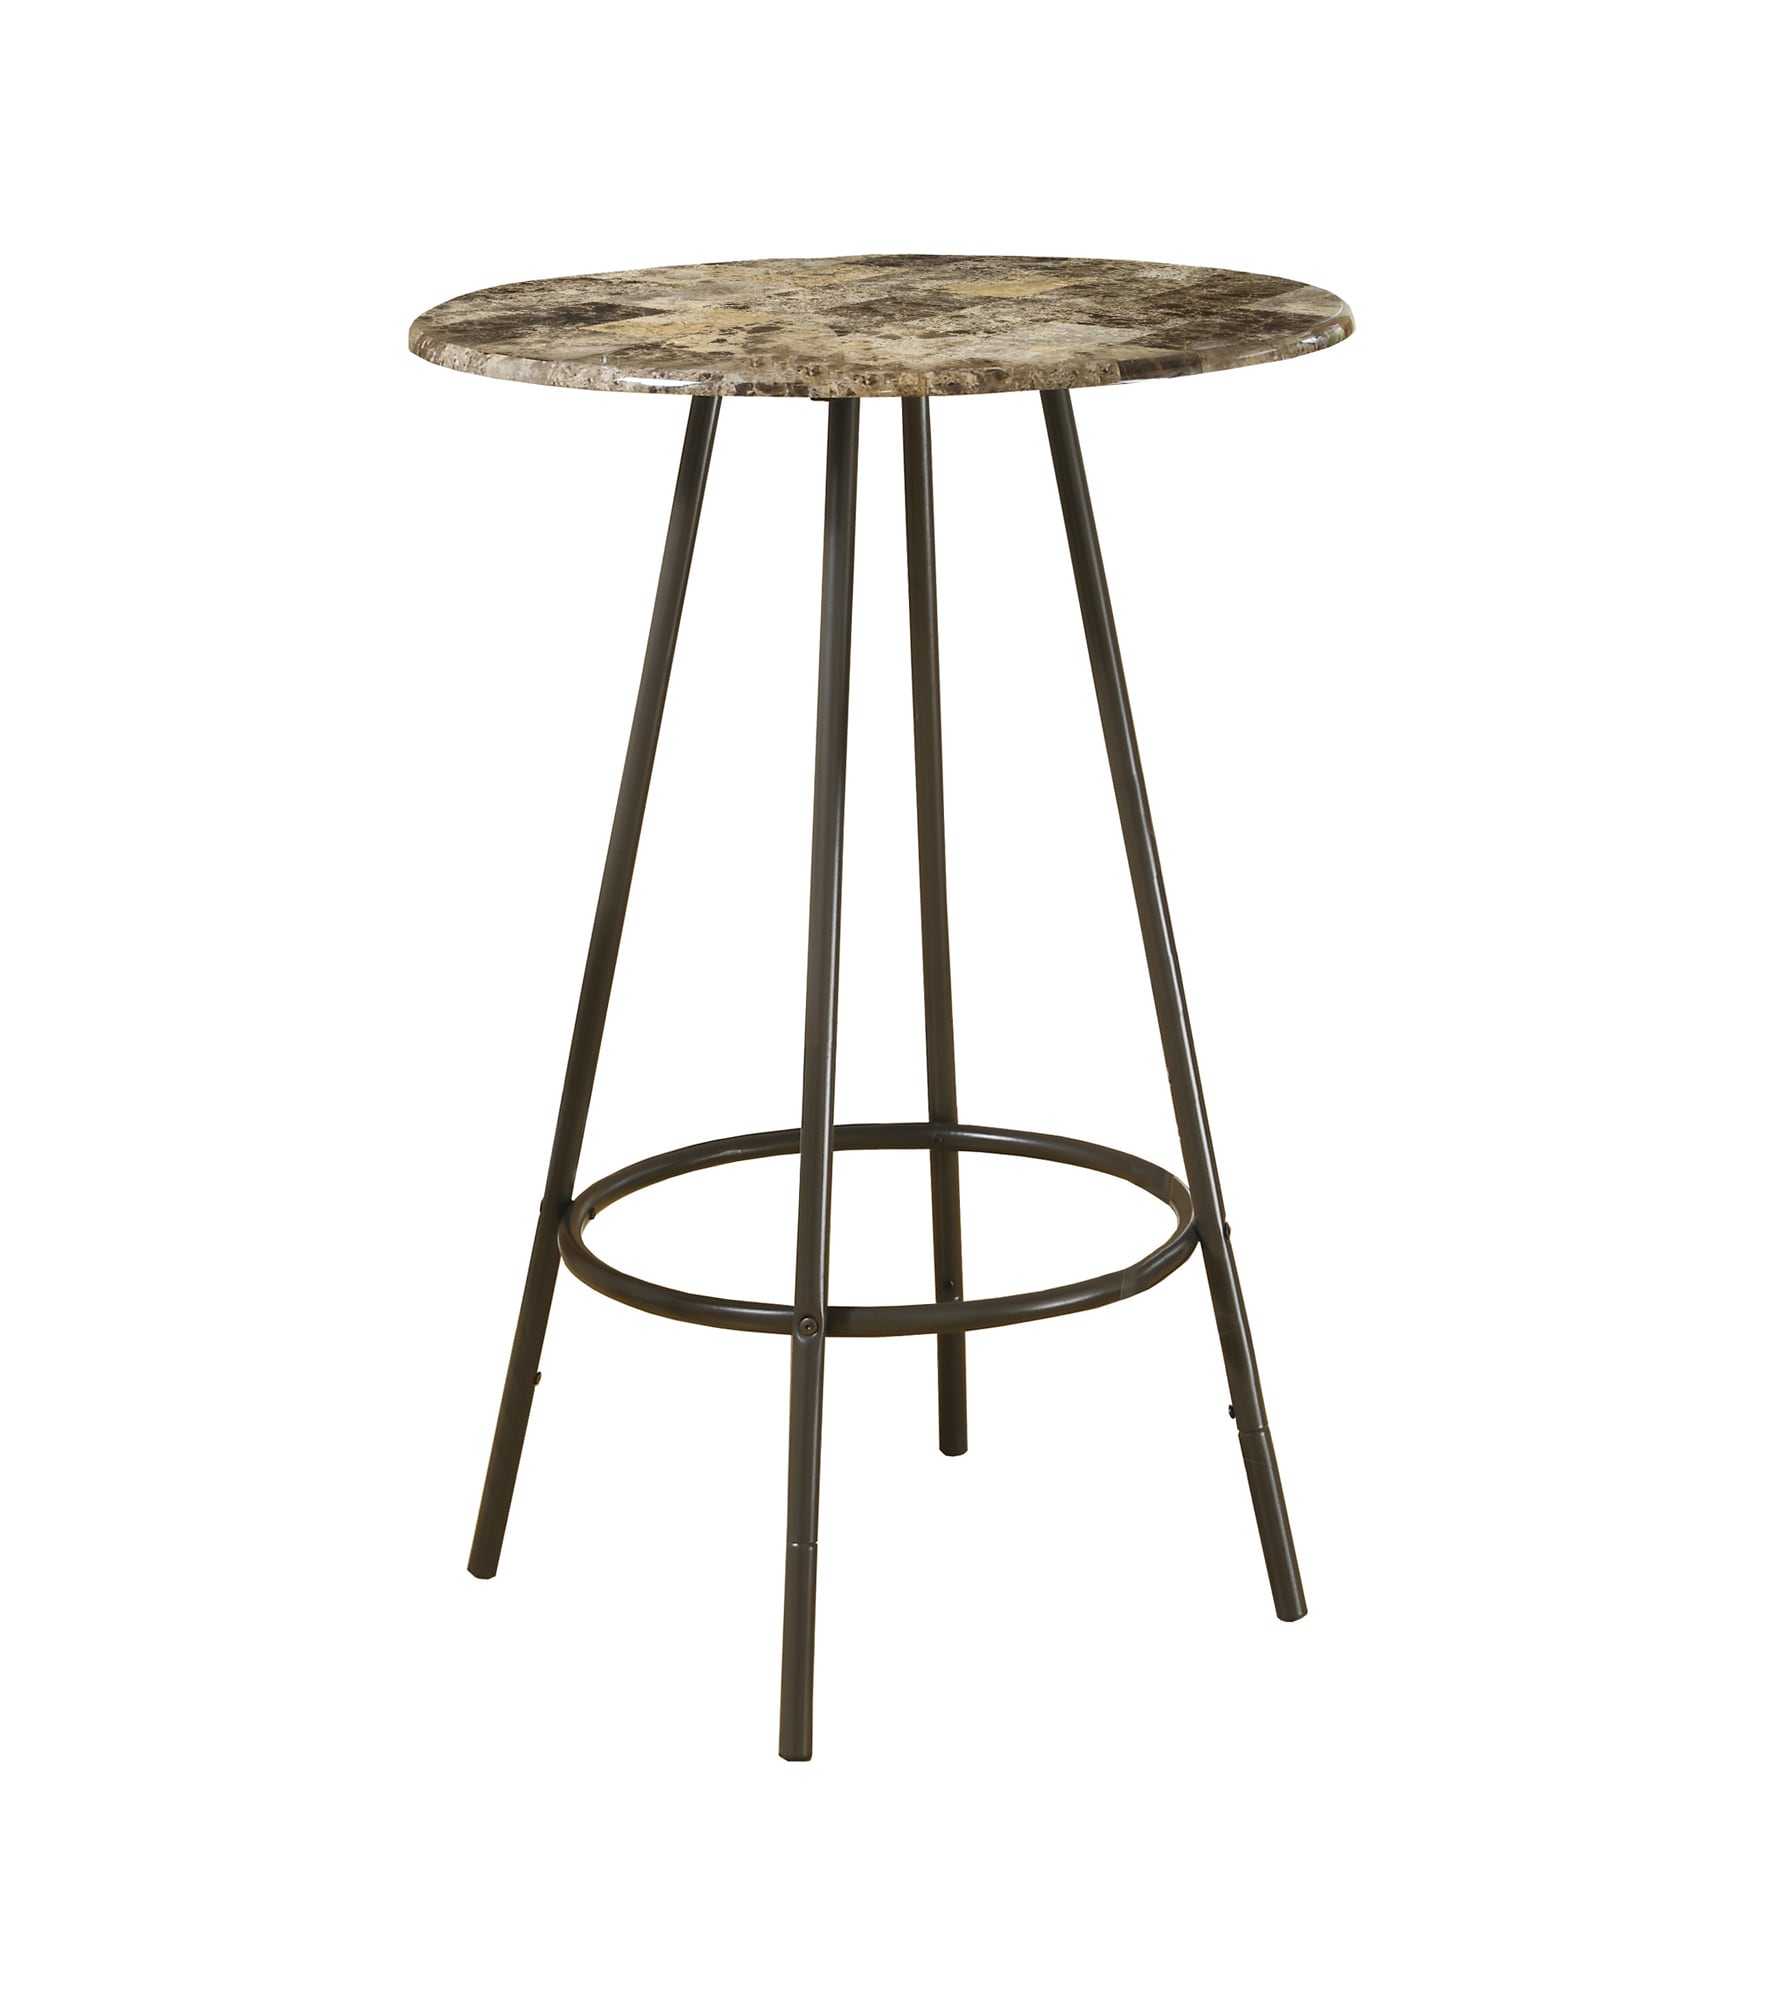 Transitional Specialties Marble Table, in Dining Round Faux Tables department Dark 42-in with Bar x Monarch Coffee Base 30-in Metal Dark L at H Brown the